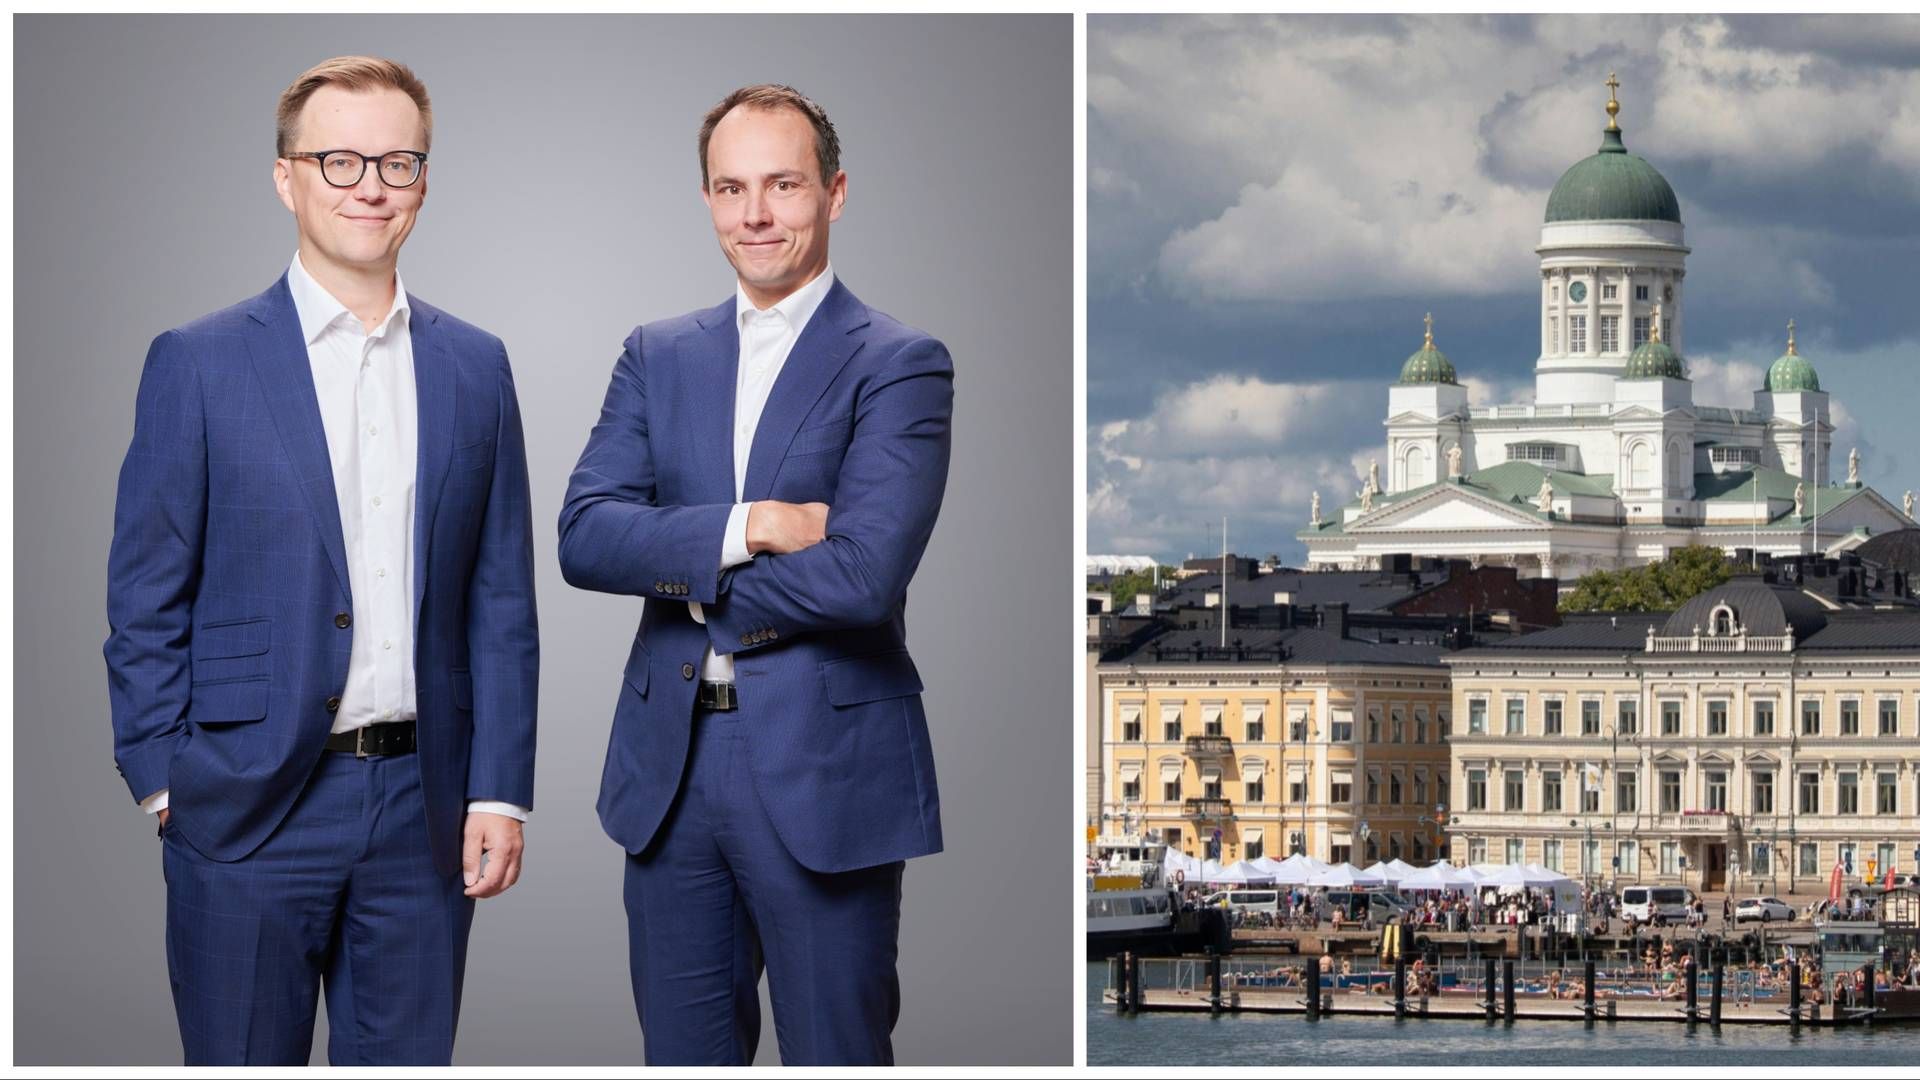 Helsinki-based portfolio managers of Schroders’ two Nordic equity funds Jan Brännback (l.) and Janne Lähdesmäki (r.). | Photo: PR Schroders (l.) and Pexels: Antti Kulmanen.